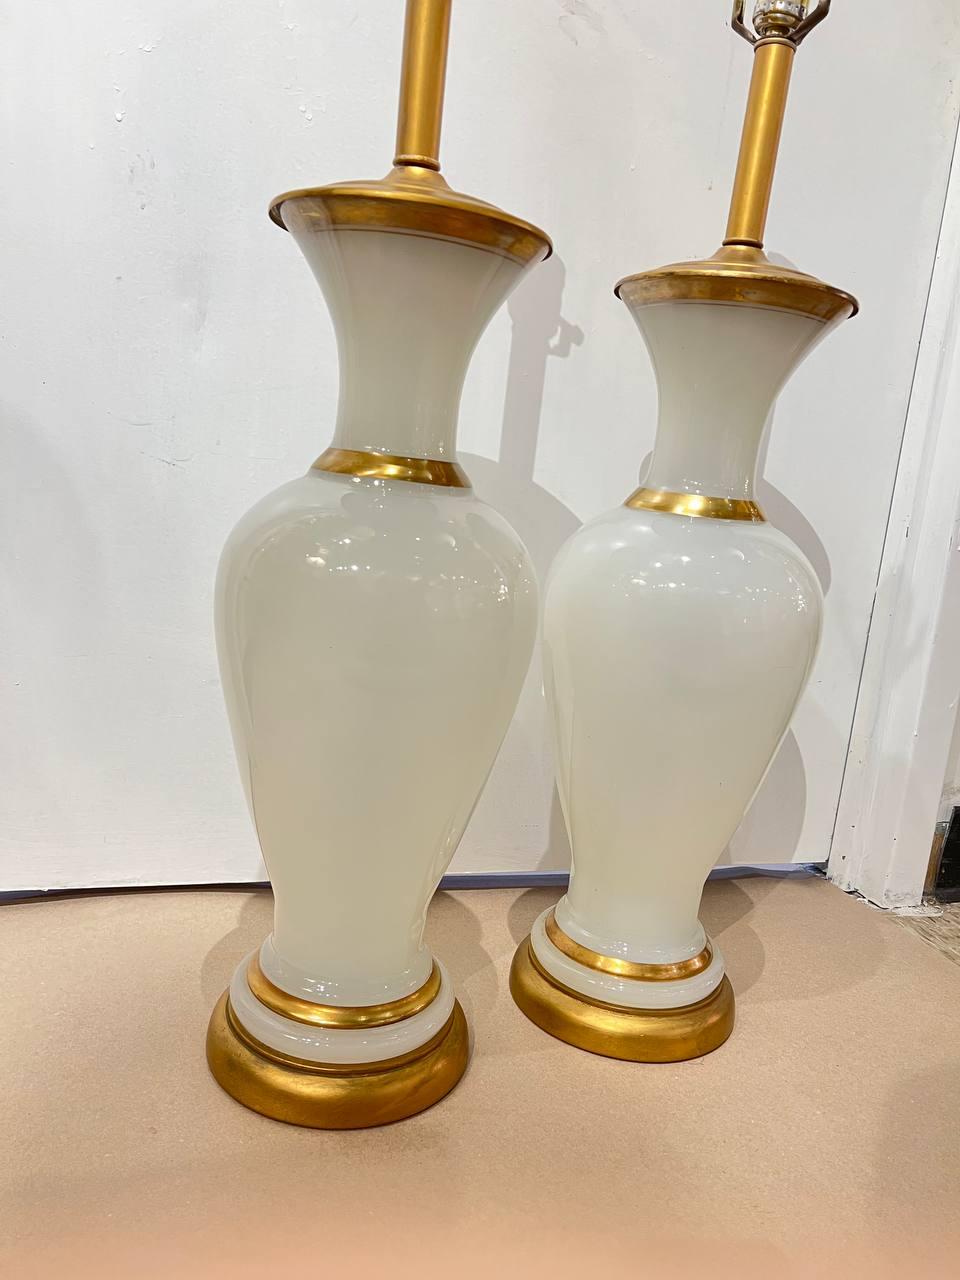 A circa 1940's French tall white Opaline glass impressive and simple design